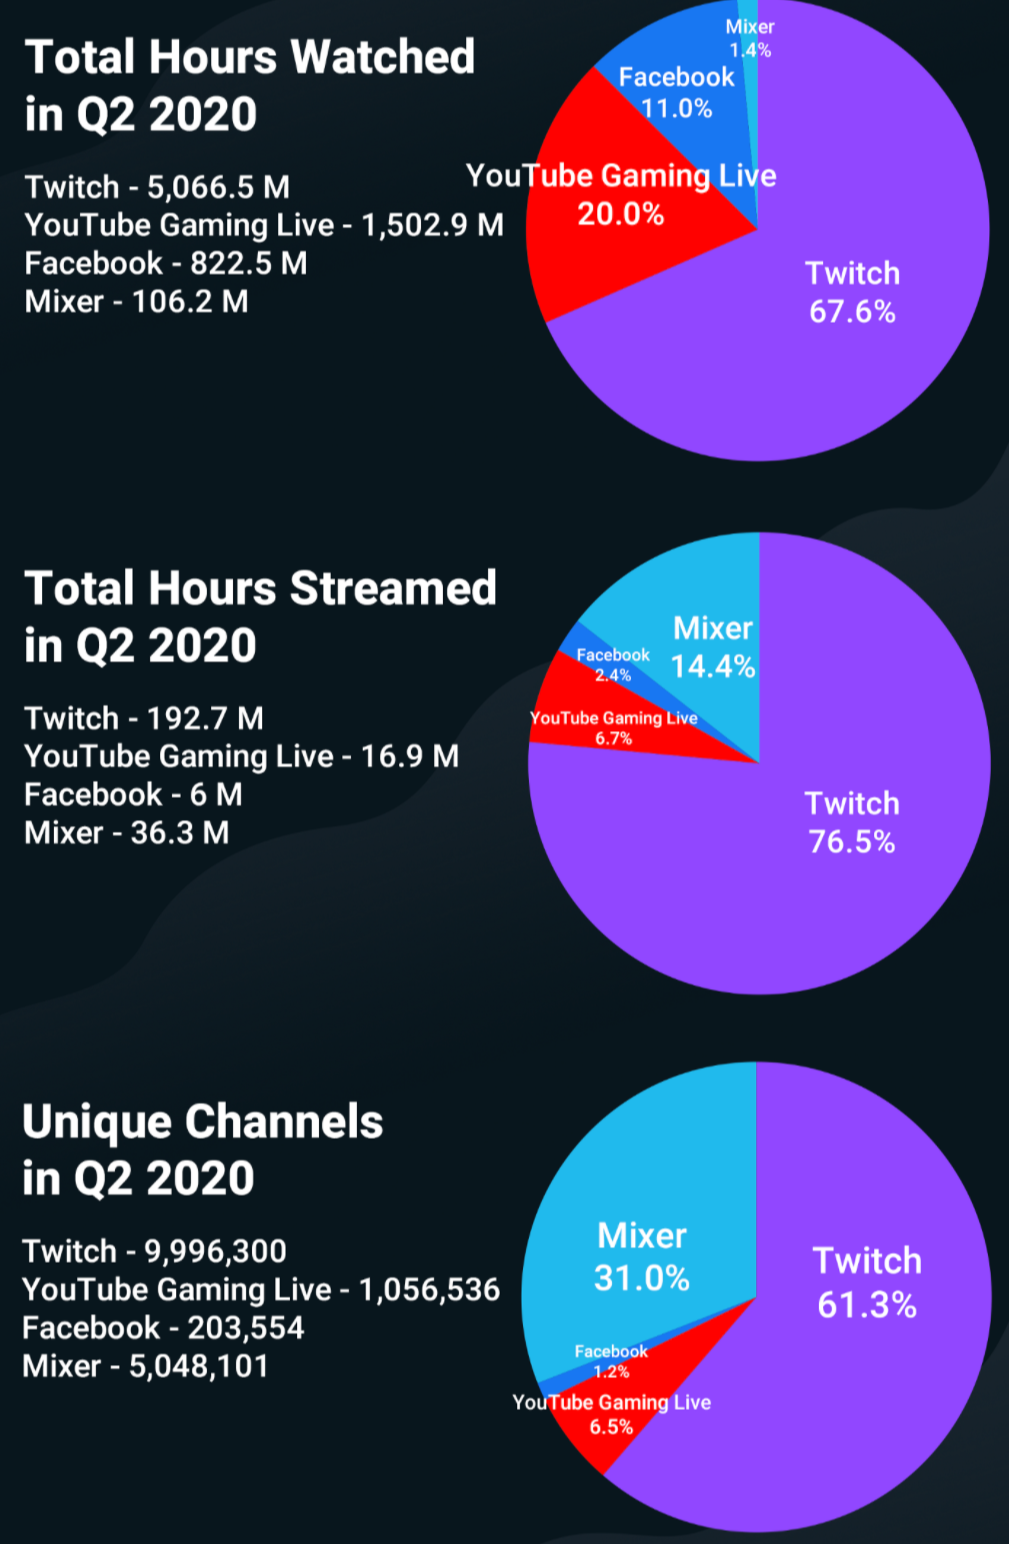 Total Hours Watched in Q2 2020